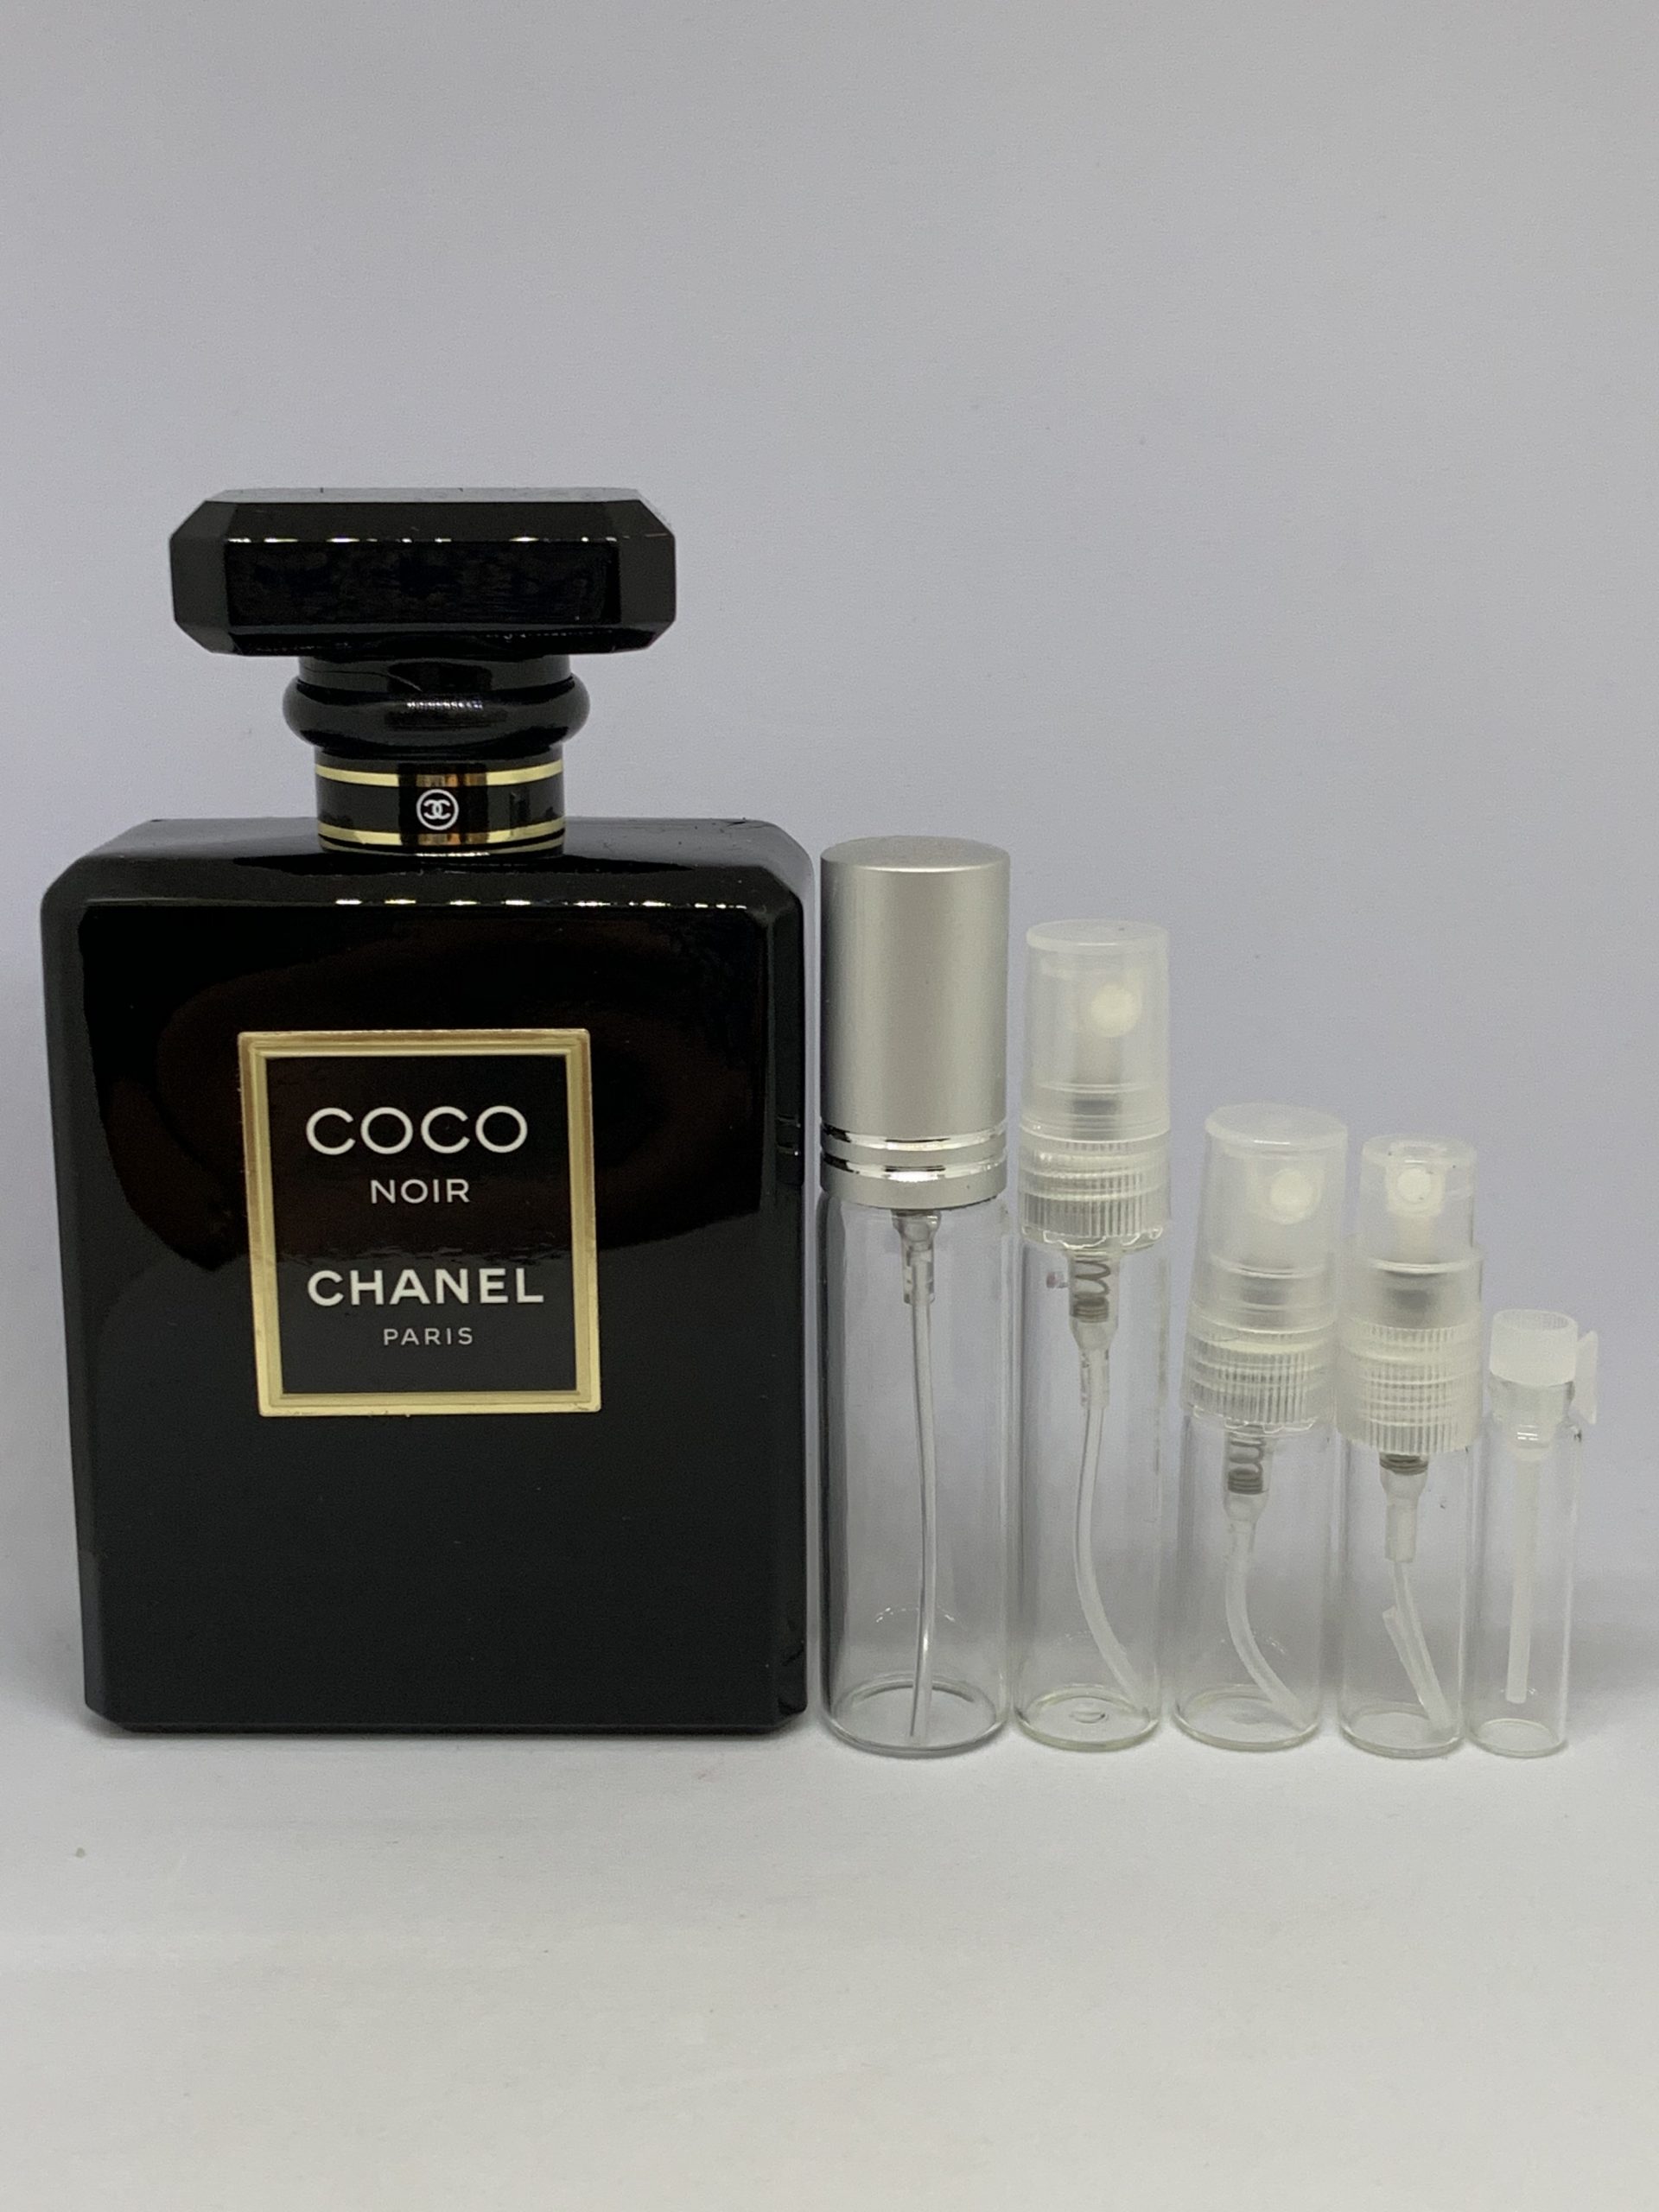 Coco Noir Chanel Perfume Oil For Women (Generic Perfumes) by www